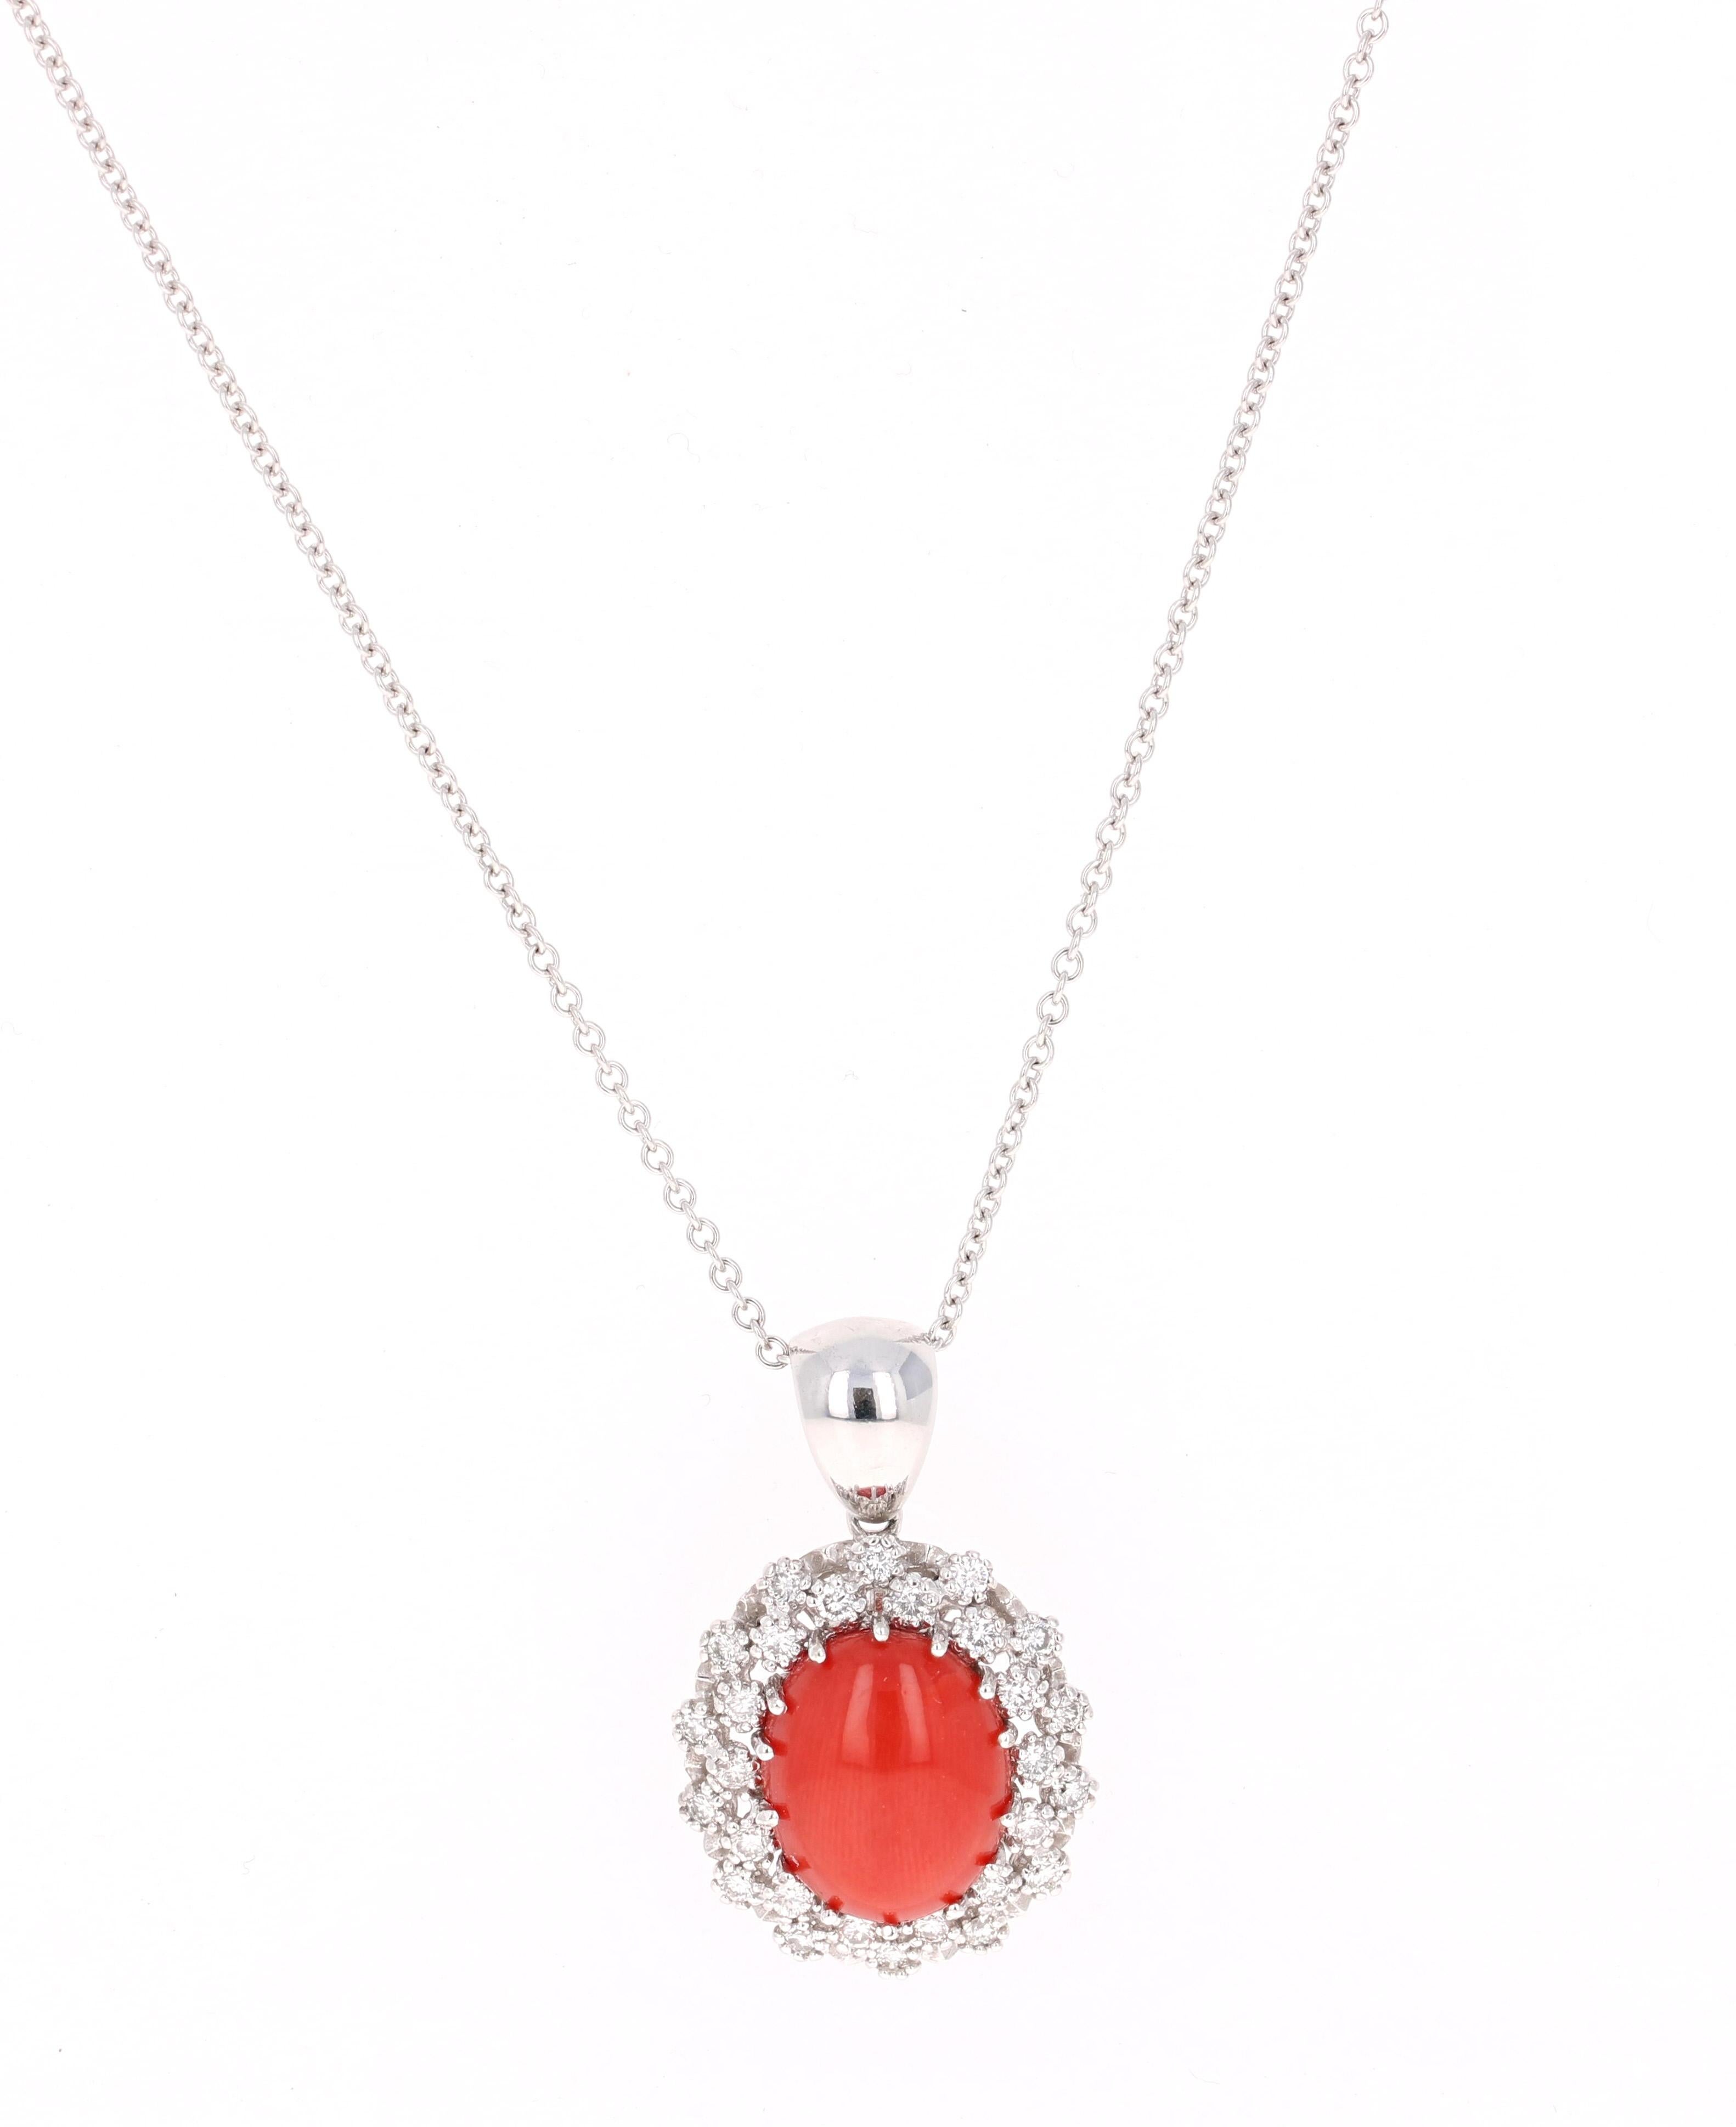 A stunning Coral and Diamond Chain Necklace

This one of a kind beauty has a magnificent 5.46 Carat Oval Cut Coral. It is surrounded by 28 Round Cut Diamonds that weigh 0.79 Carats.  The total carat weight of the pendant is 6.25 carats.

The pendant